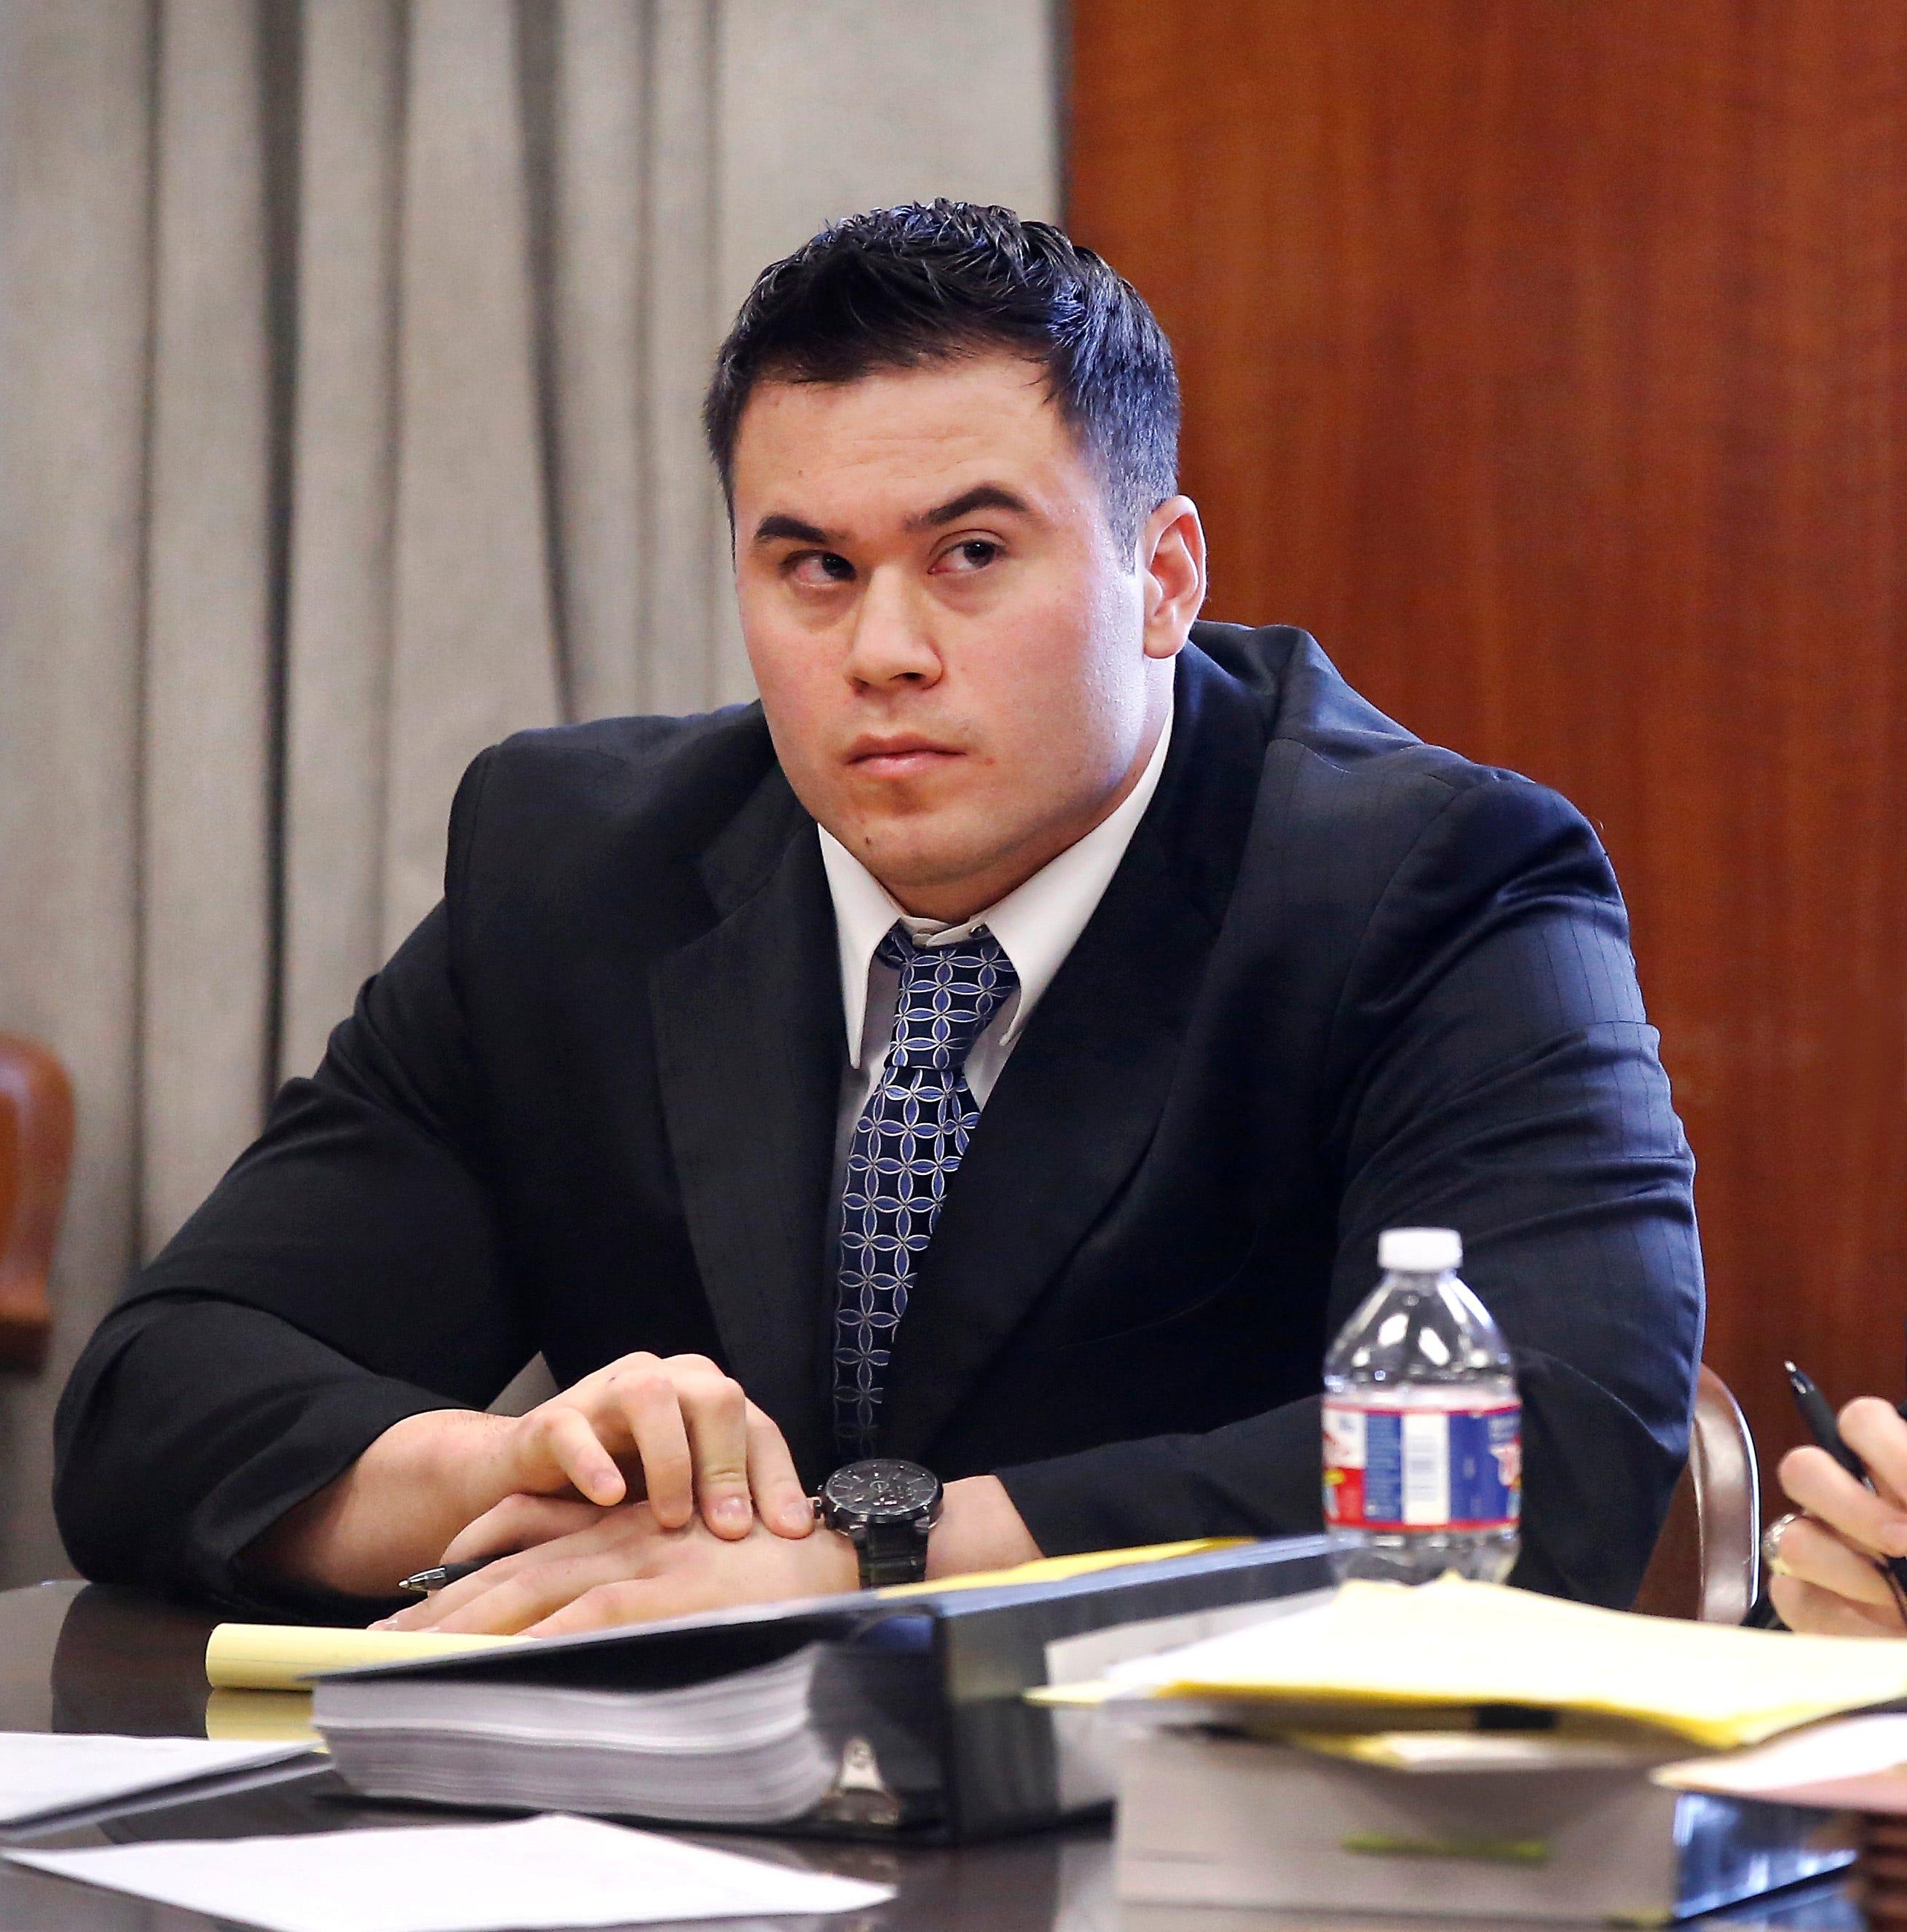 Former Oklahoma City police officer Daniel Holtzclaw is shown in Oklahoma County District Court on Nov. 17, 2014, during a preliminary hearing in his criminal case.